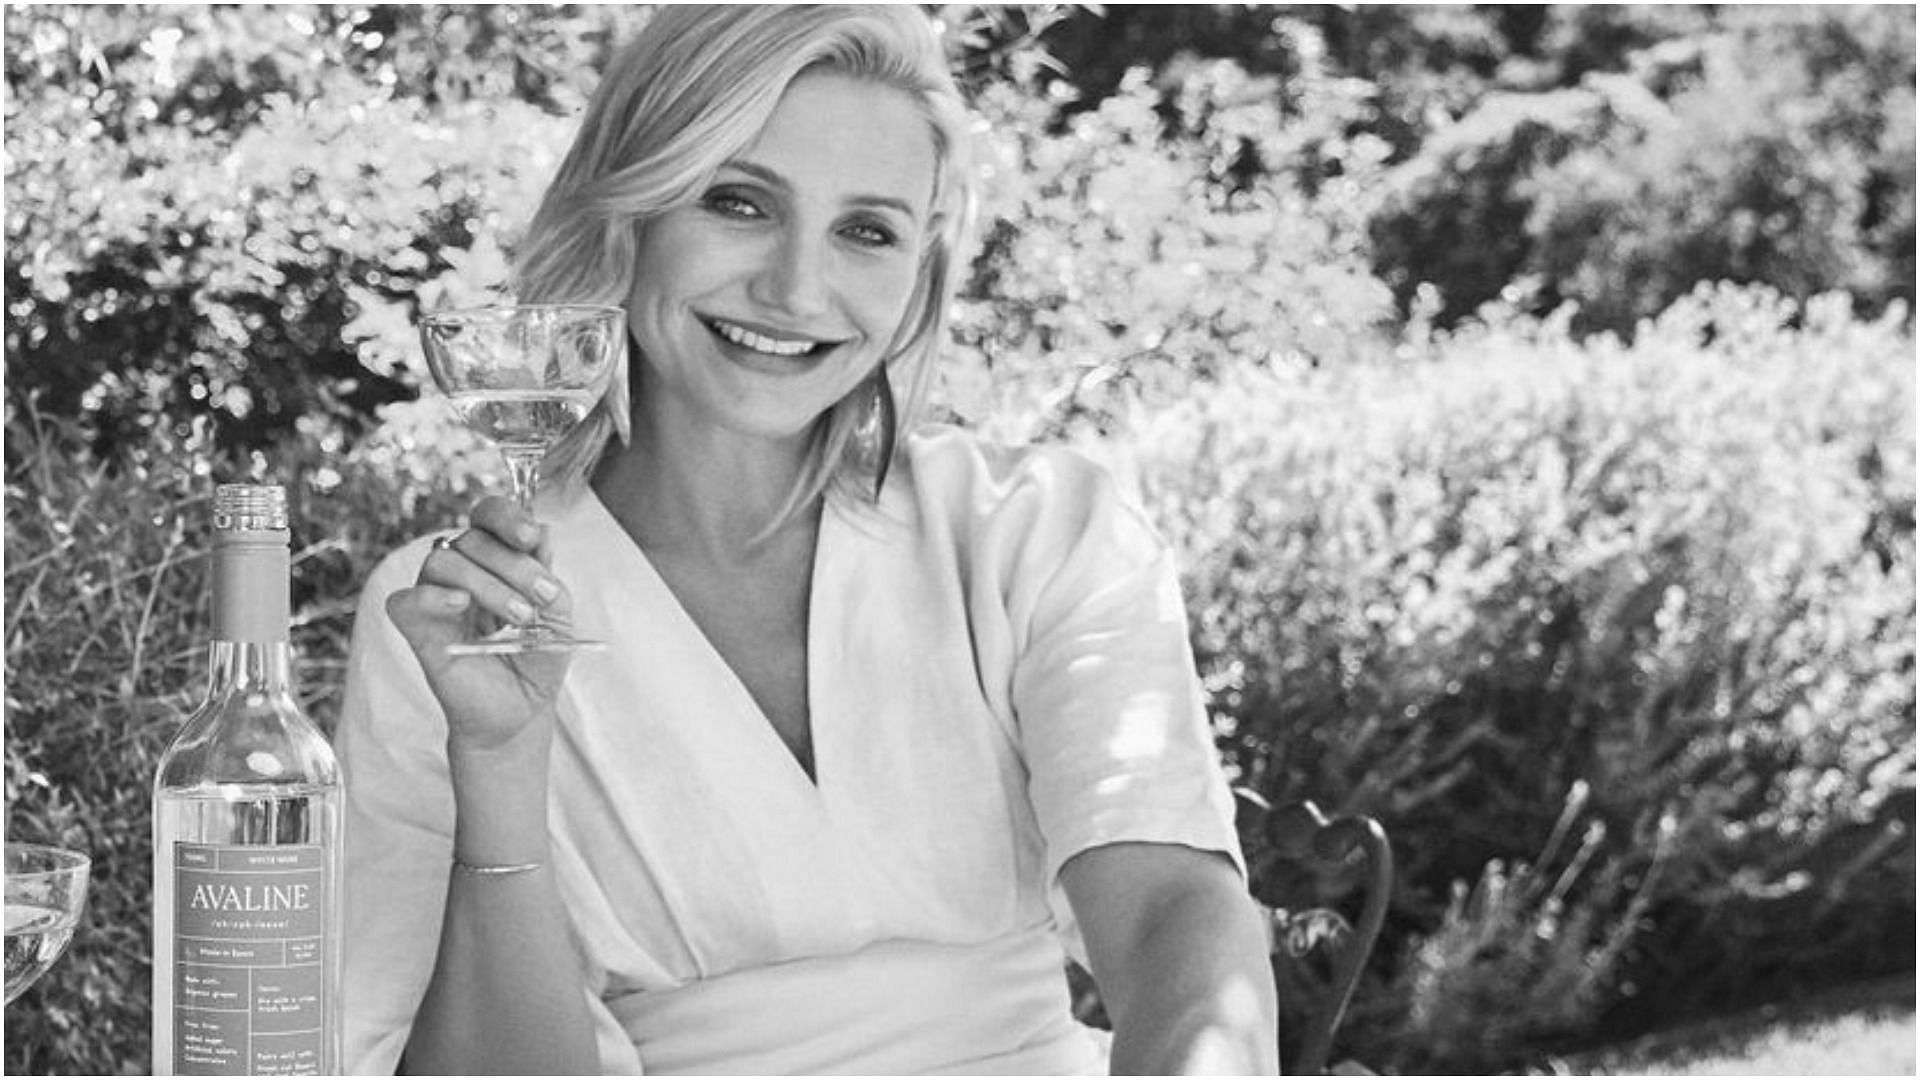 Workout and Diet routine of Cameron Diaz. (Photo by @lesteticoeterno via Instagram)